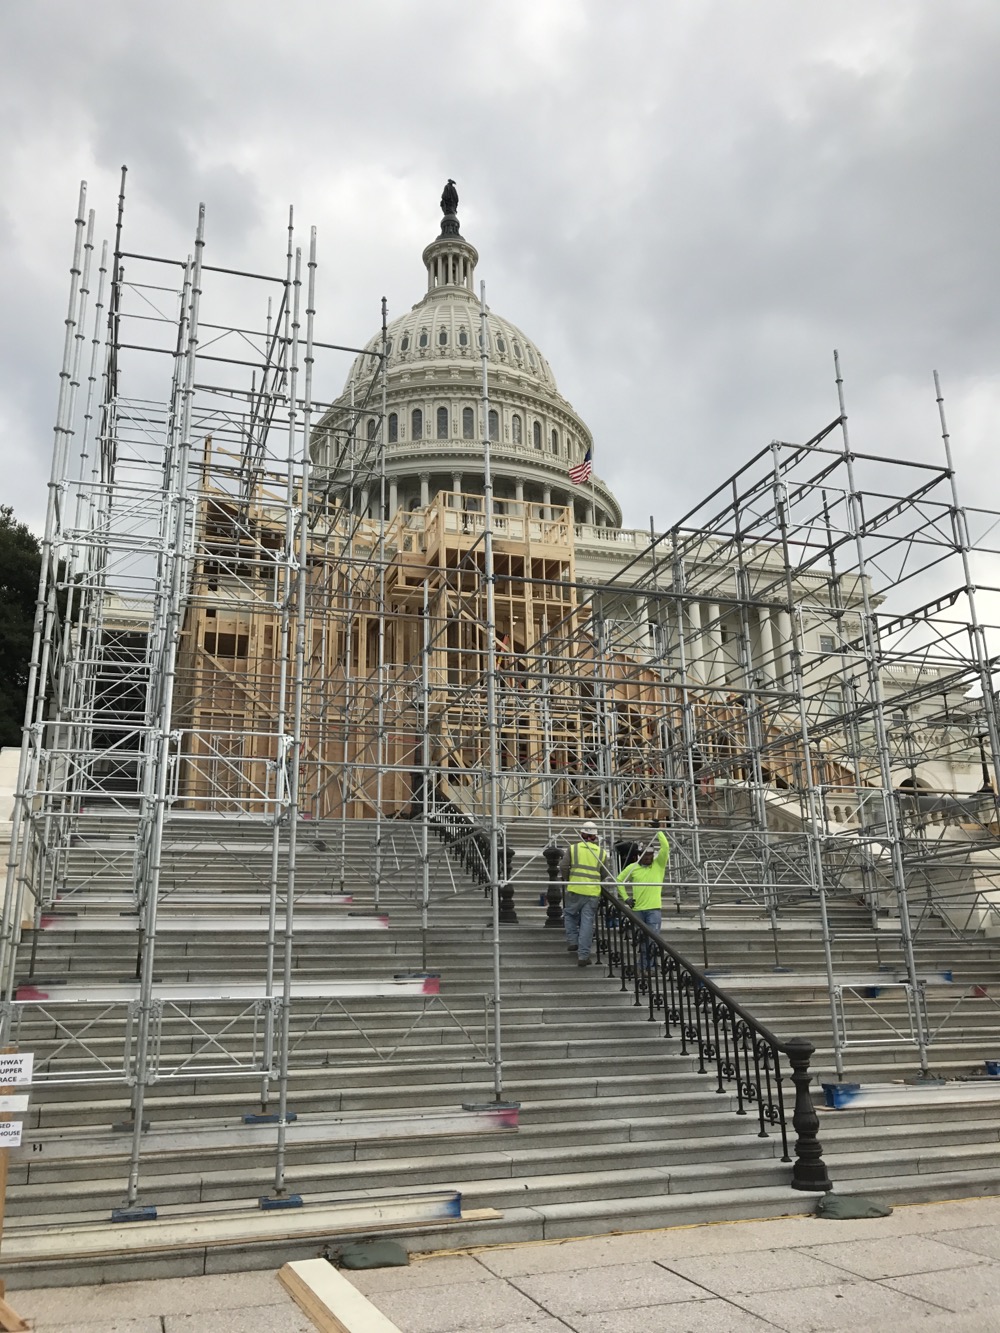 OSHA competent persons inspect scaffolding for the inauguration at the US Capitol.